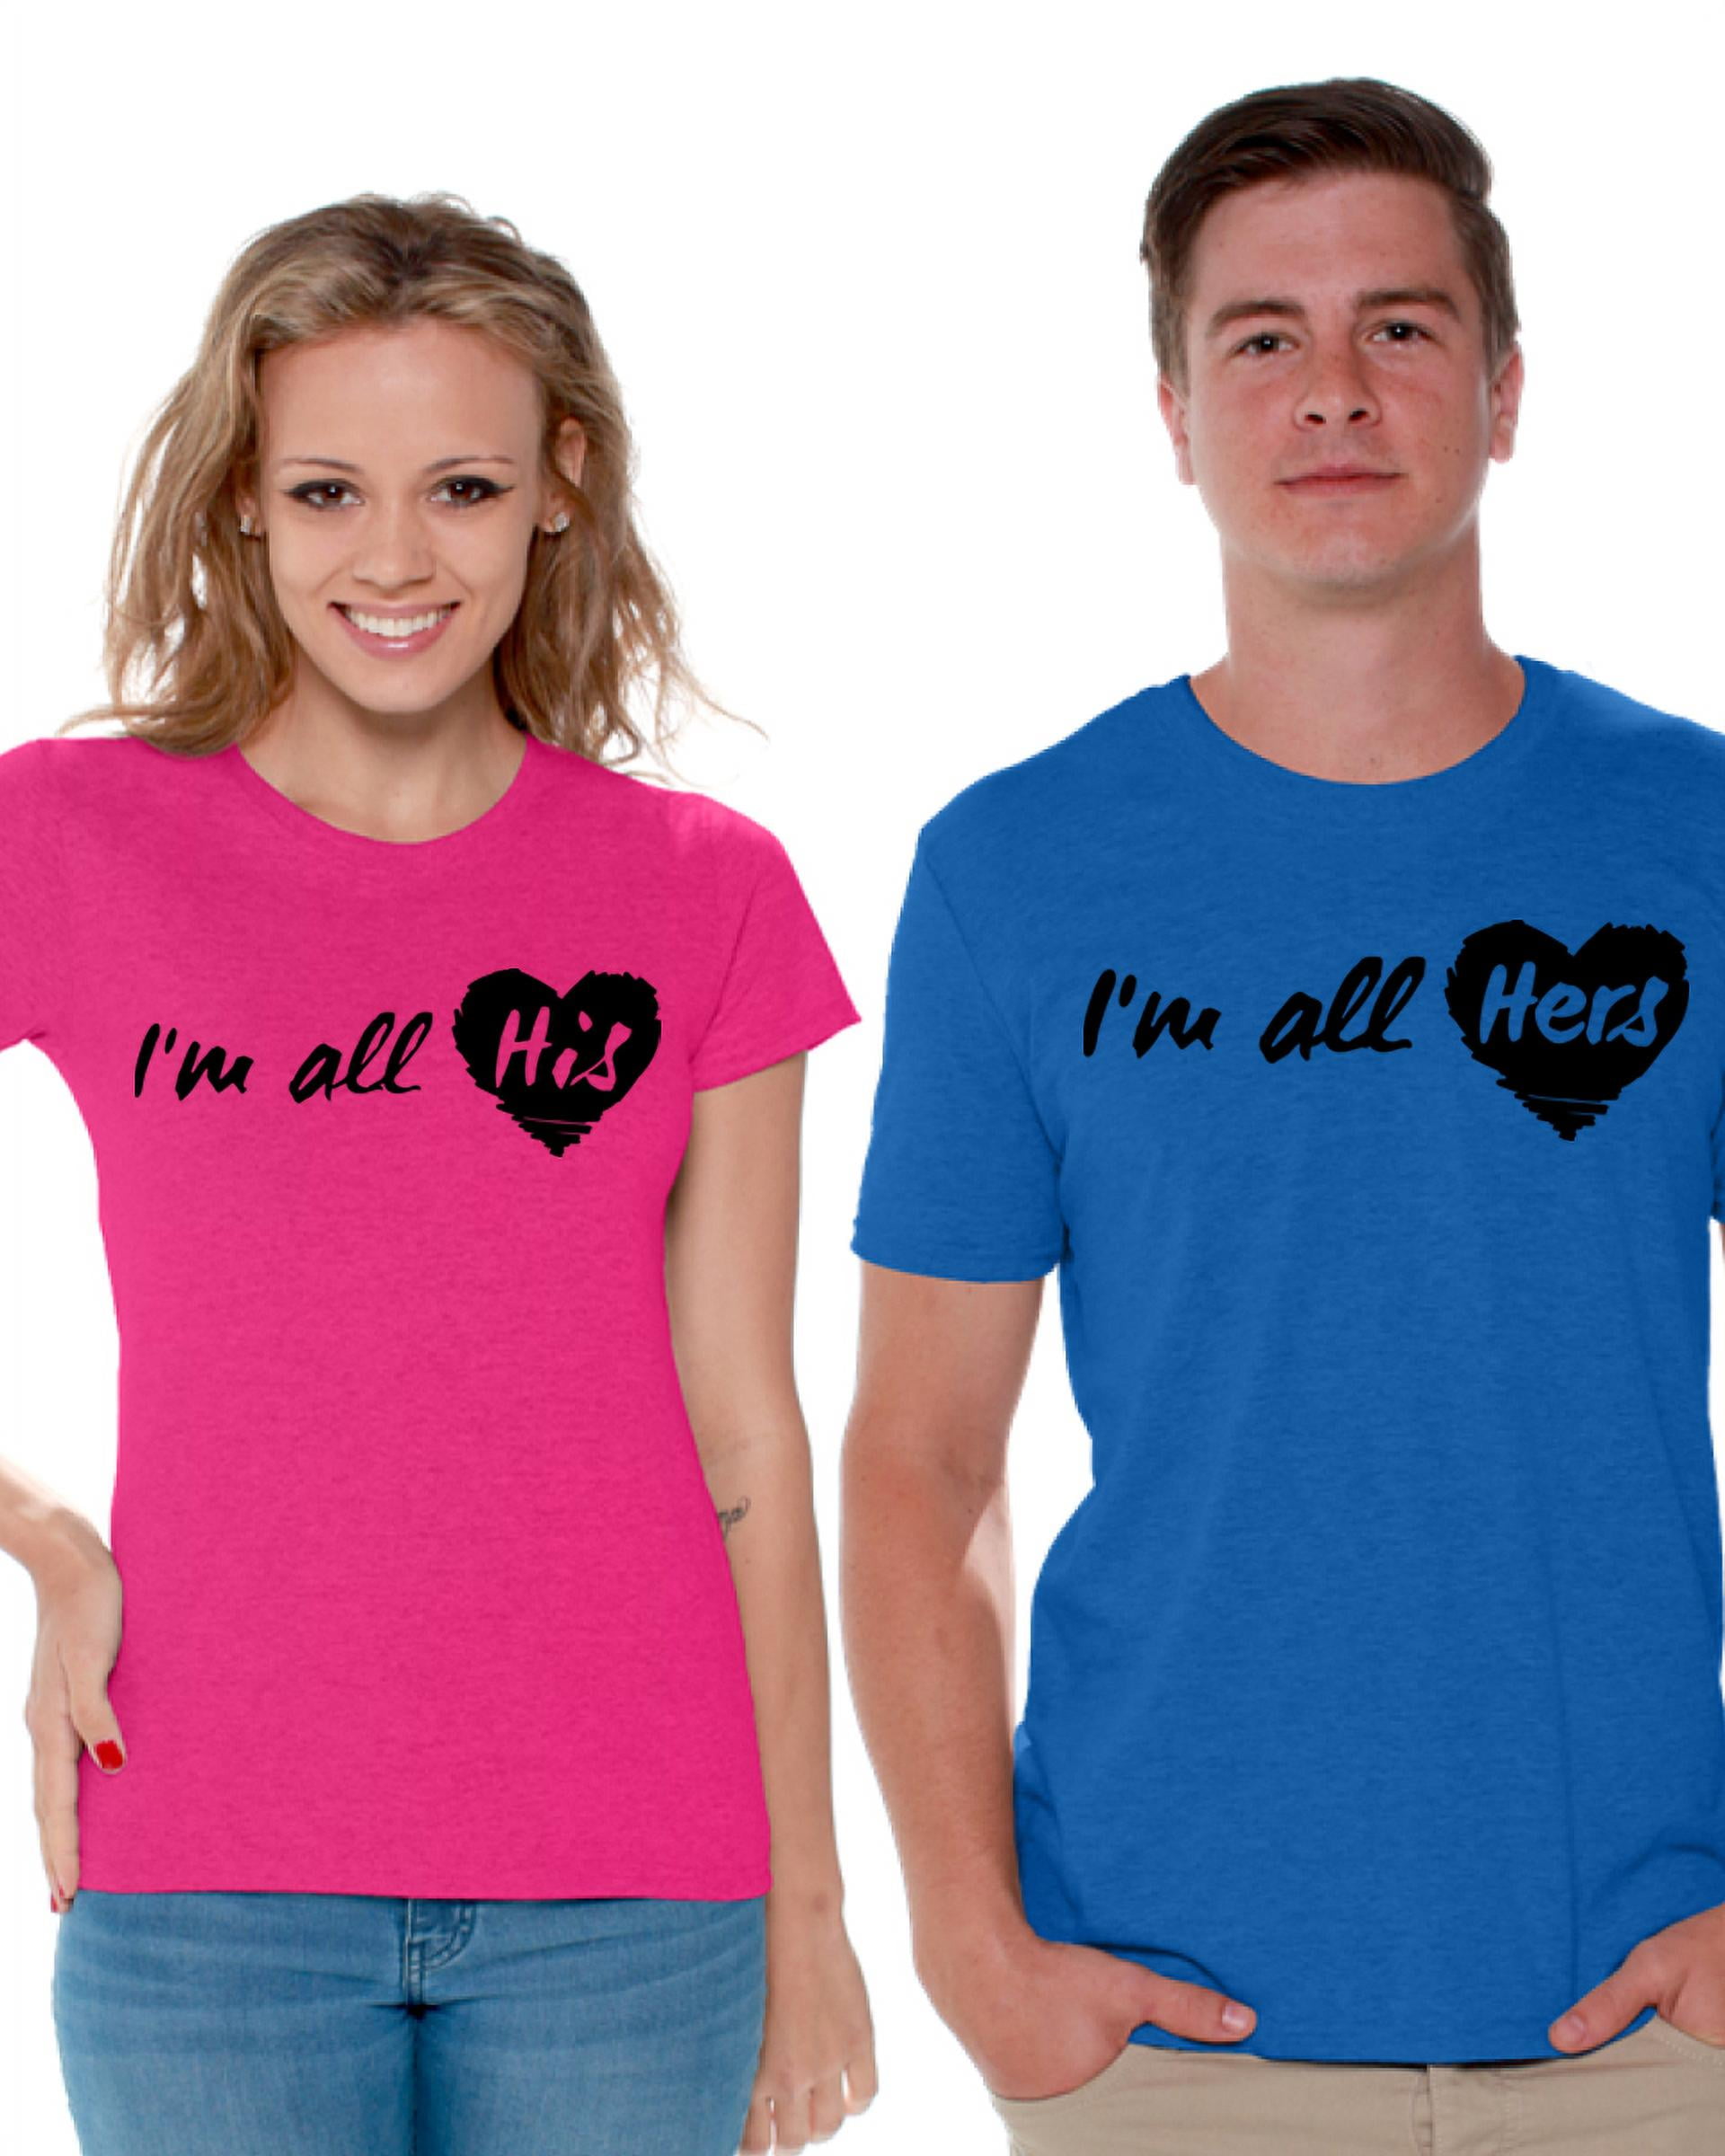 Women's Tshirts Online: Low Price Offer on Tshirts for Women - AJIO